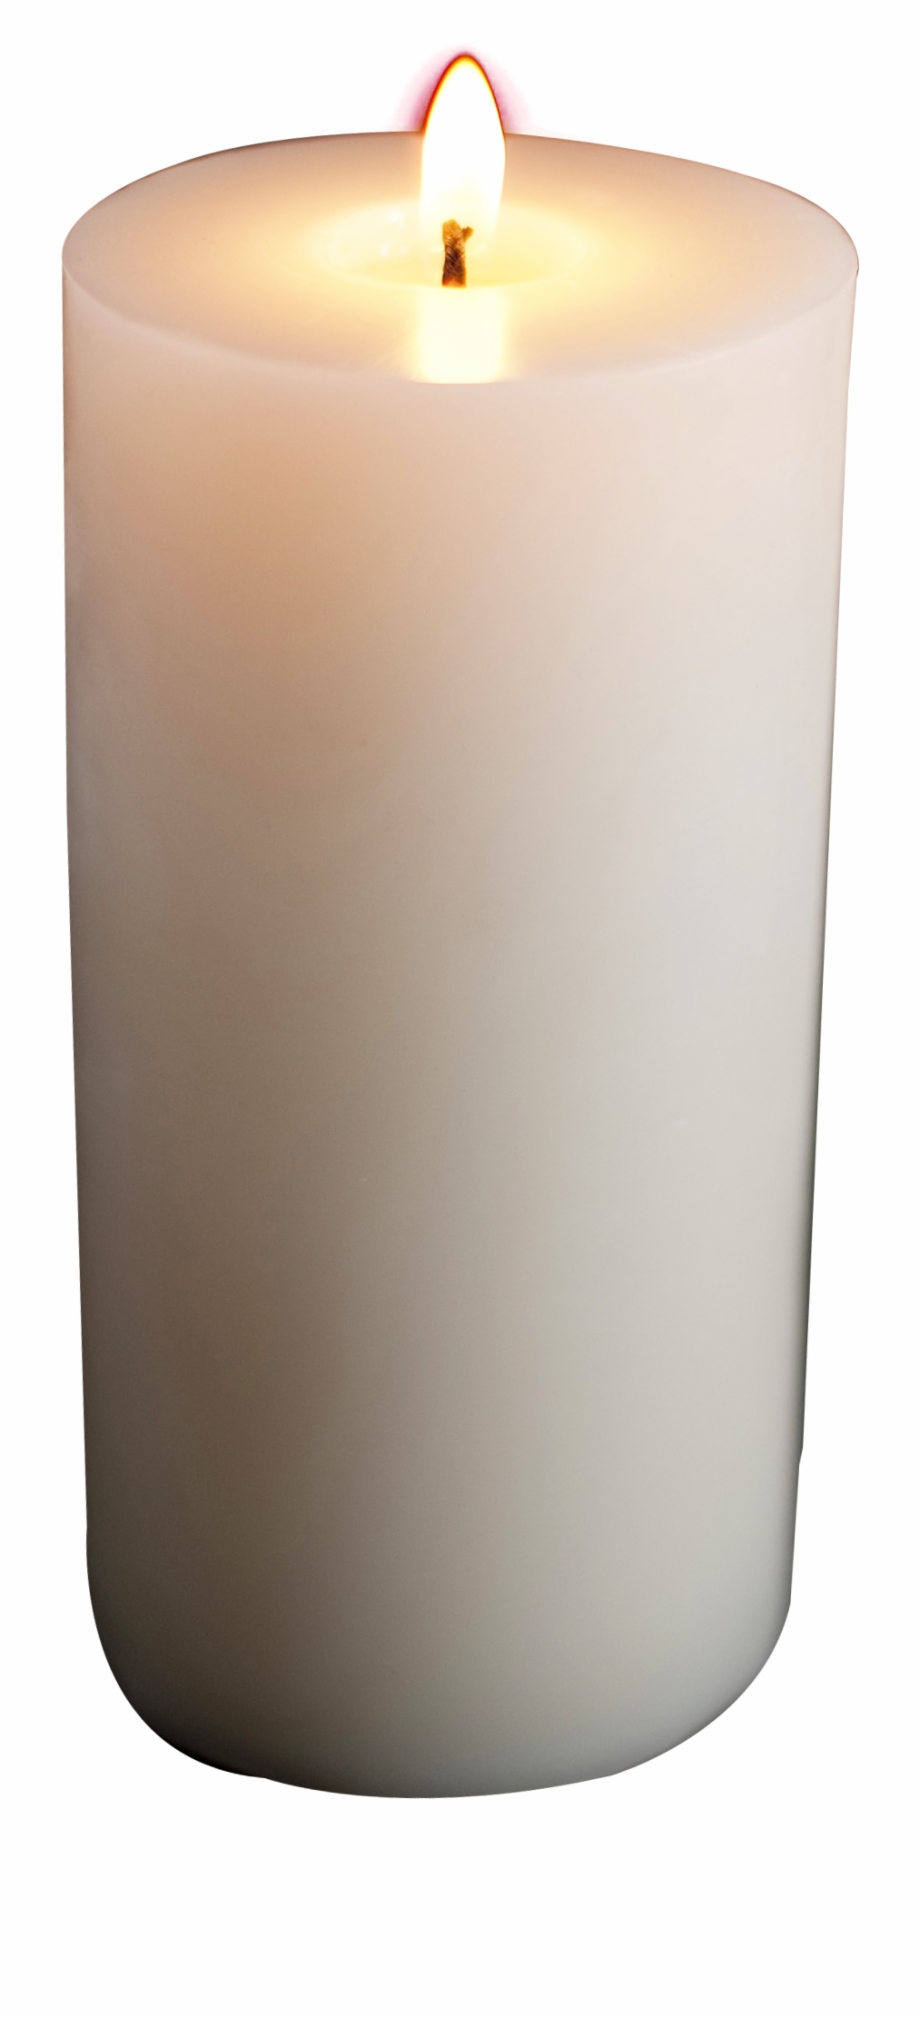 Candle Flame Png Transparent Candles Png